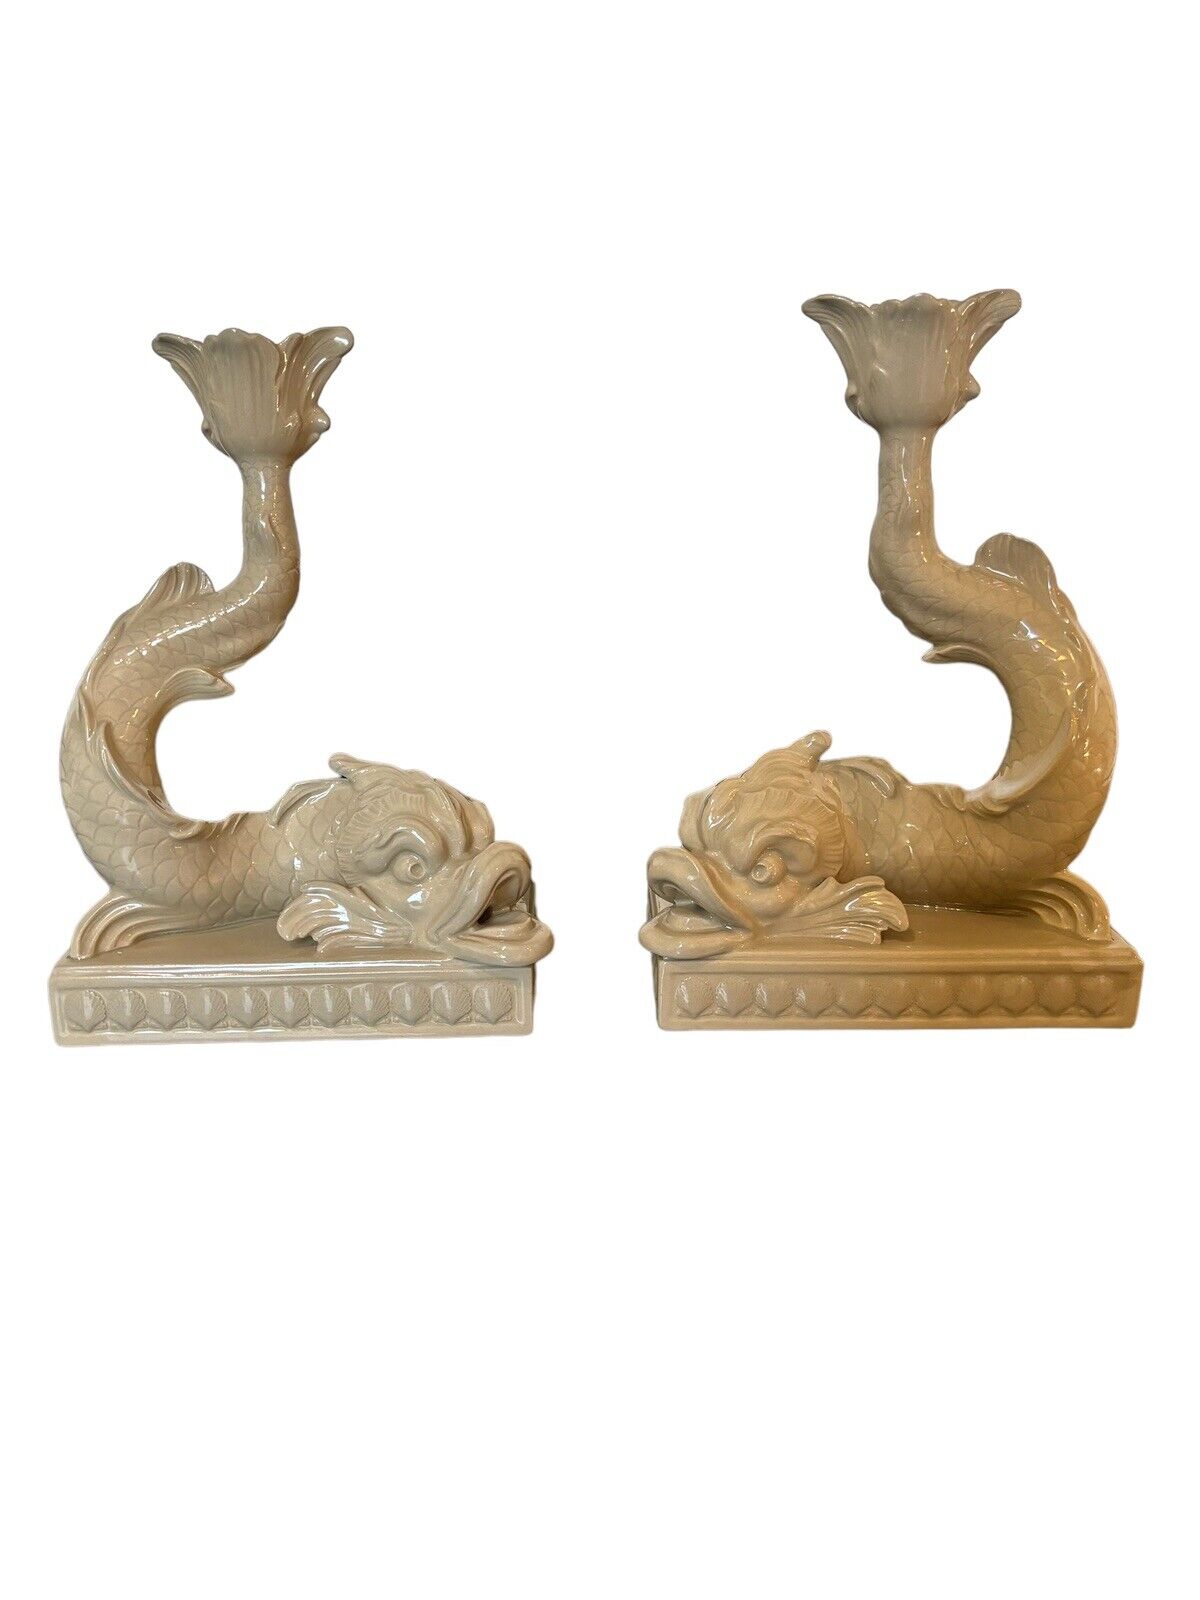 Wedgwood Dolphin Fish Candlestick Pair